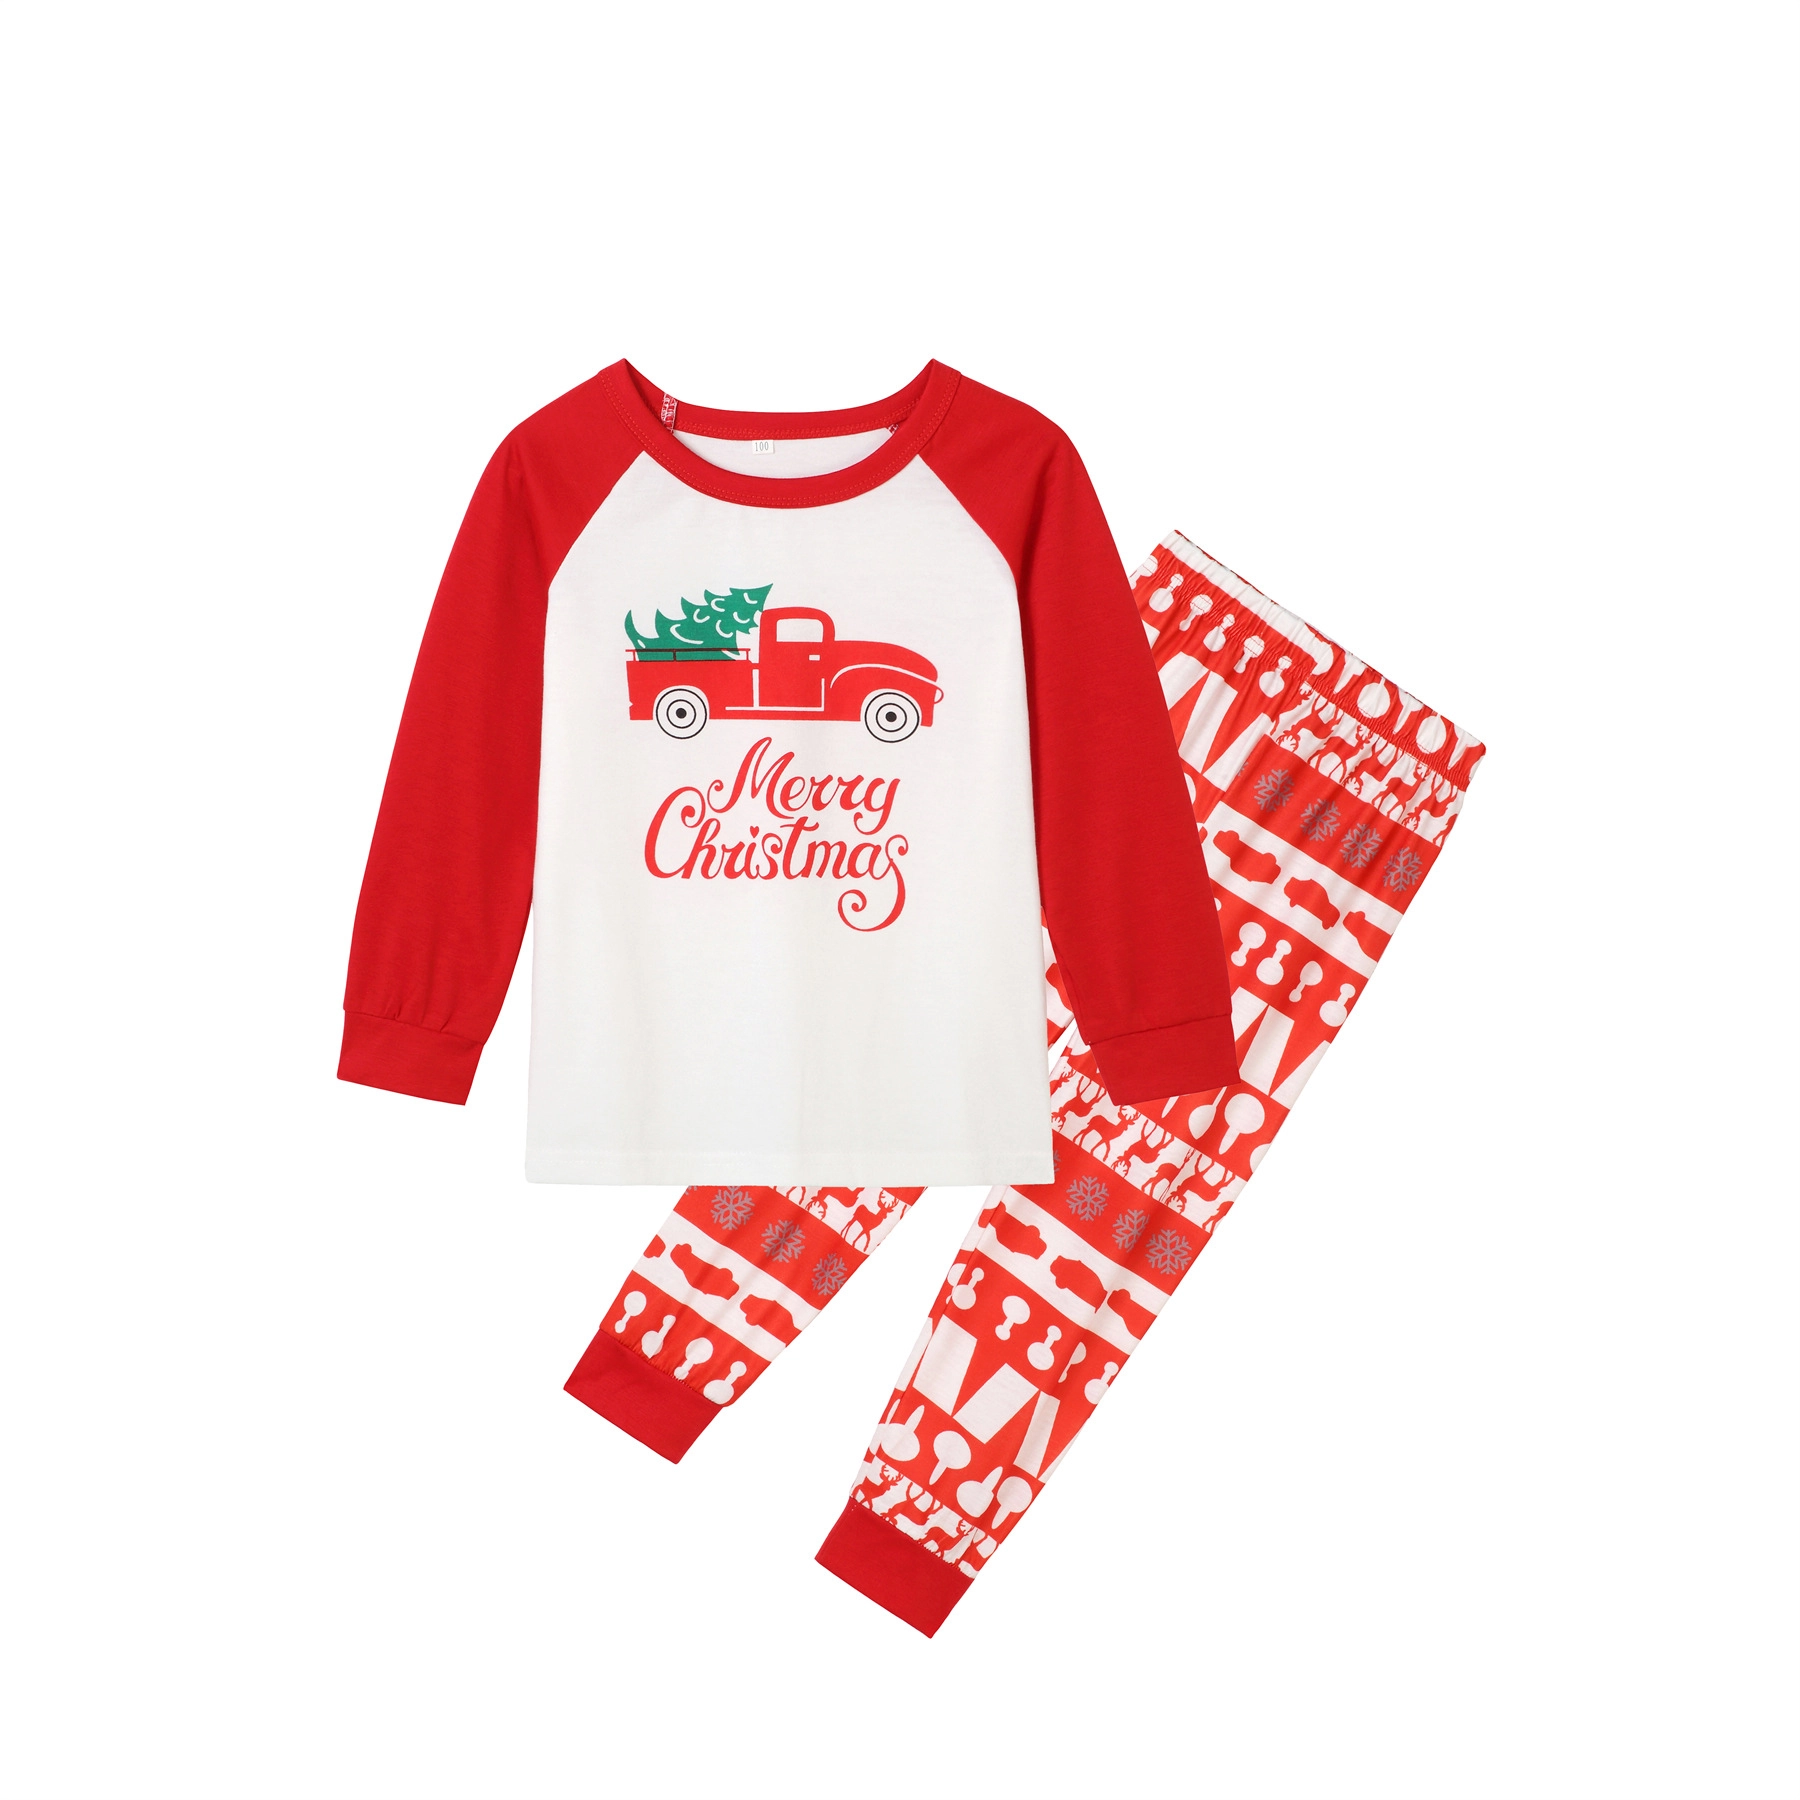 Red 'Merry Christmas' Printed With Christmas Tree Car Pattern Christmas Family Matching Long-sleeve Pajamas Sets